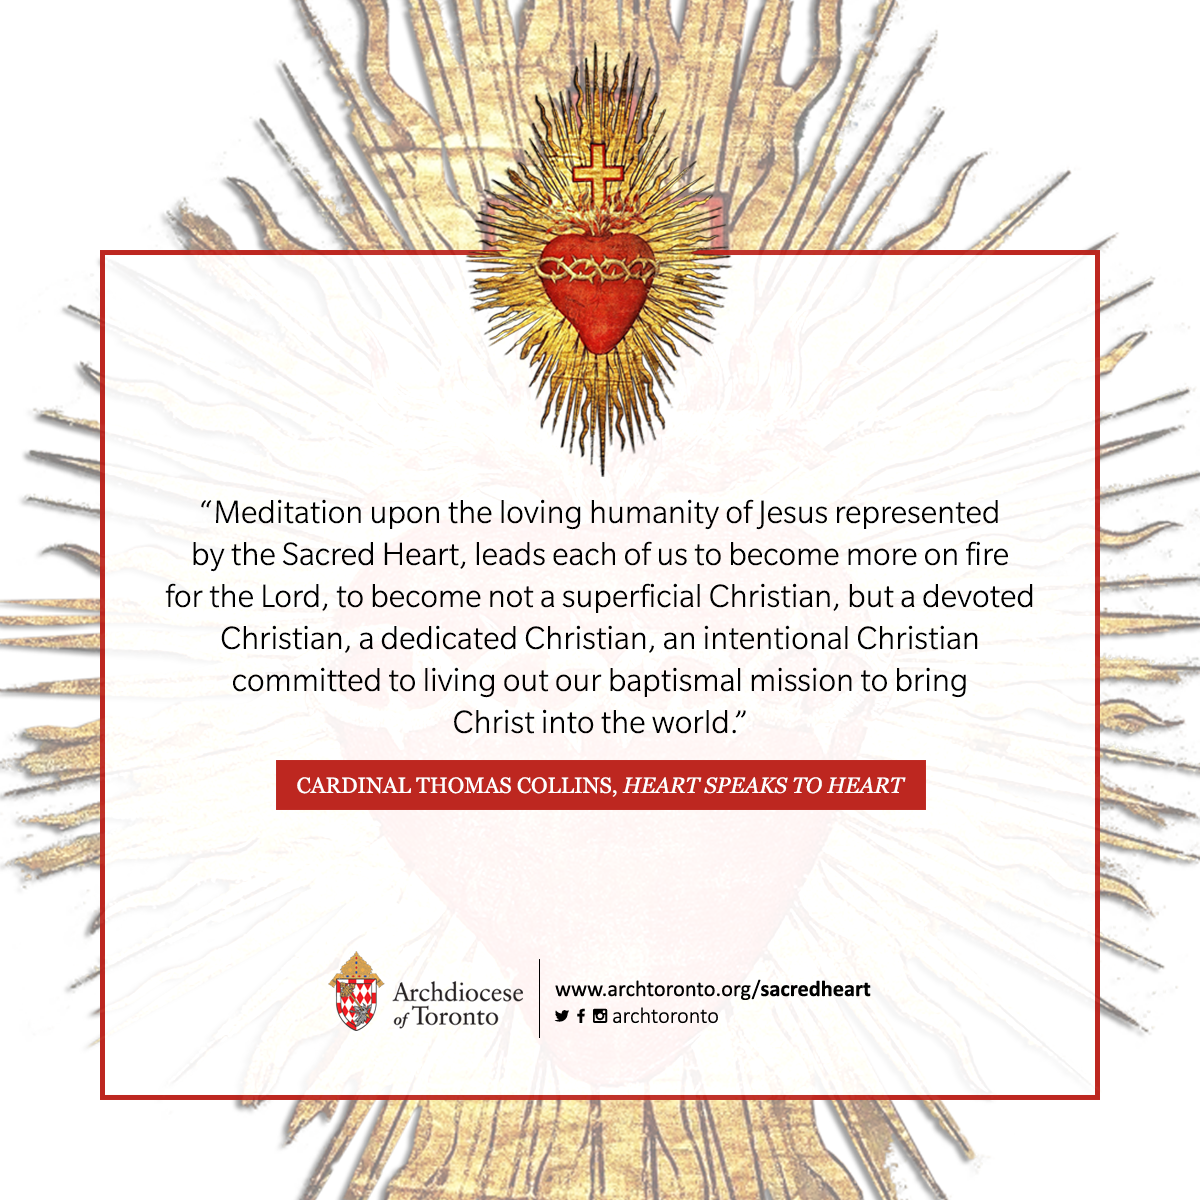 Meditation upon the loving humanity of Jesus represented by the Sacred Heart, leads each of us to become more on fire for the Lord, to become not a superficial Christian, but a devoted Christian, a dedicated Christian, an intentional Christian committed to living out our baptismal mission to bring Christ into the world.